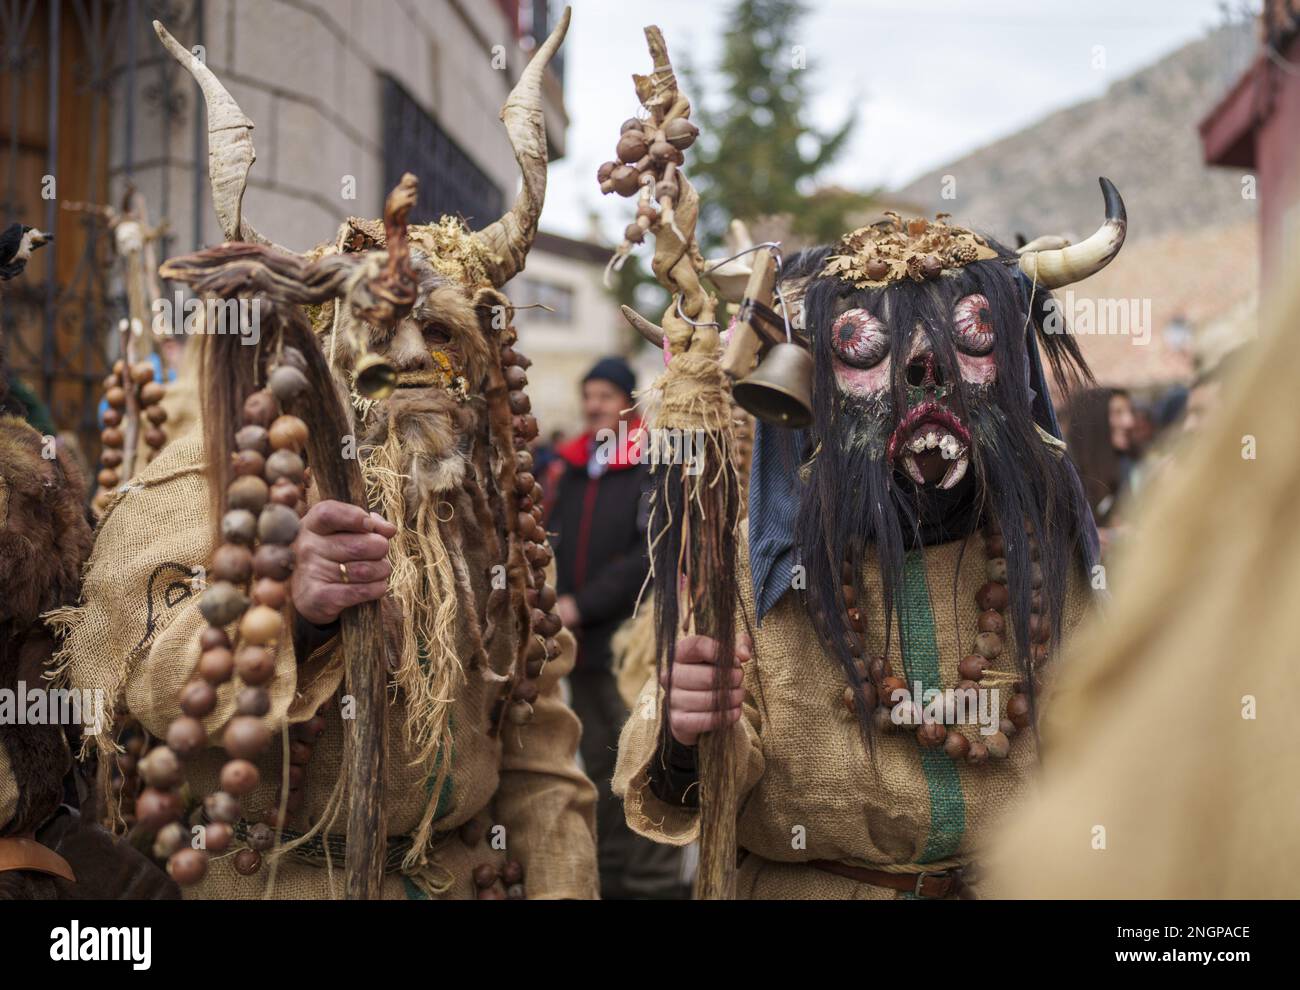 Navalacruz, Spain. 18th Feb, 2023. Carnival revellers dressed as a traditional 'Harramacho' wearing animal horns and other agricultural decor take part in a carnival festival in the village of Navalacruz, Spain, on Saturday, February 18, 2023. The 'Herramacho' figures, whose costumes are made from natural materials collected from the surrounding environment, were believed to protect family and cattle in pre-Roman rituals. Photo by Paul Hanna/UPI Credit: UPI/Alamy Live News Stock Photo